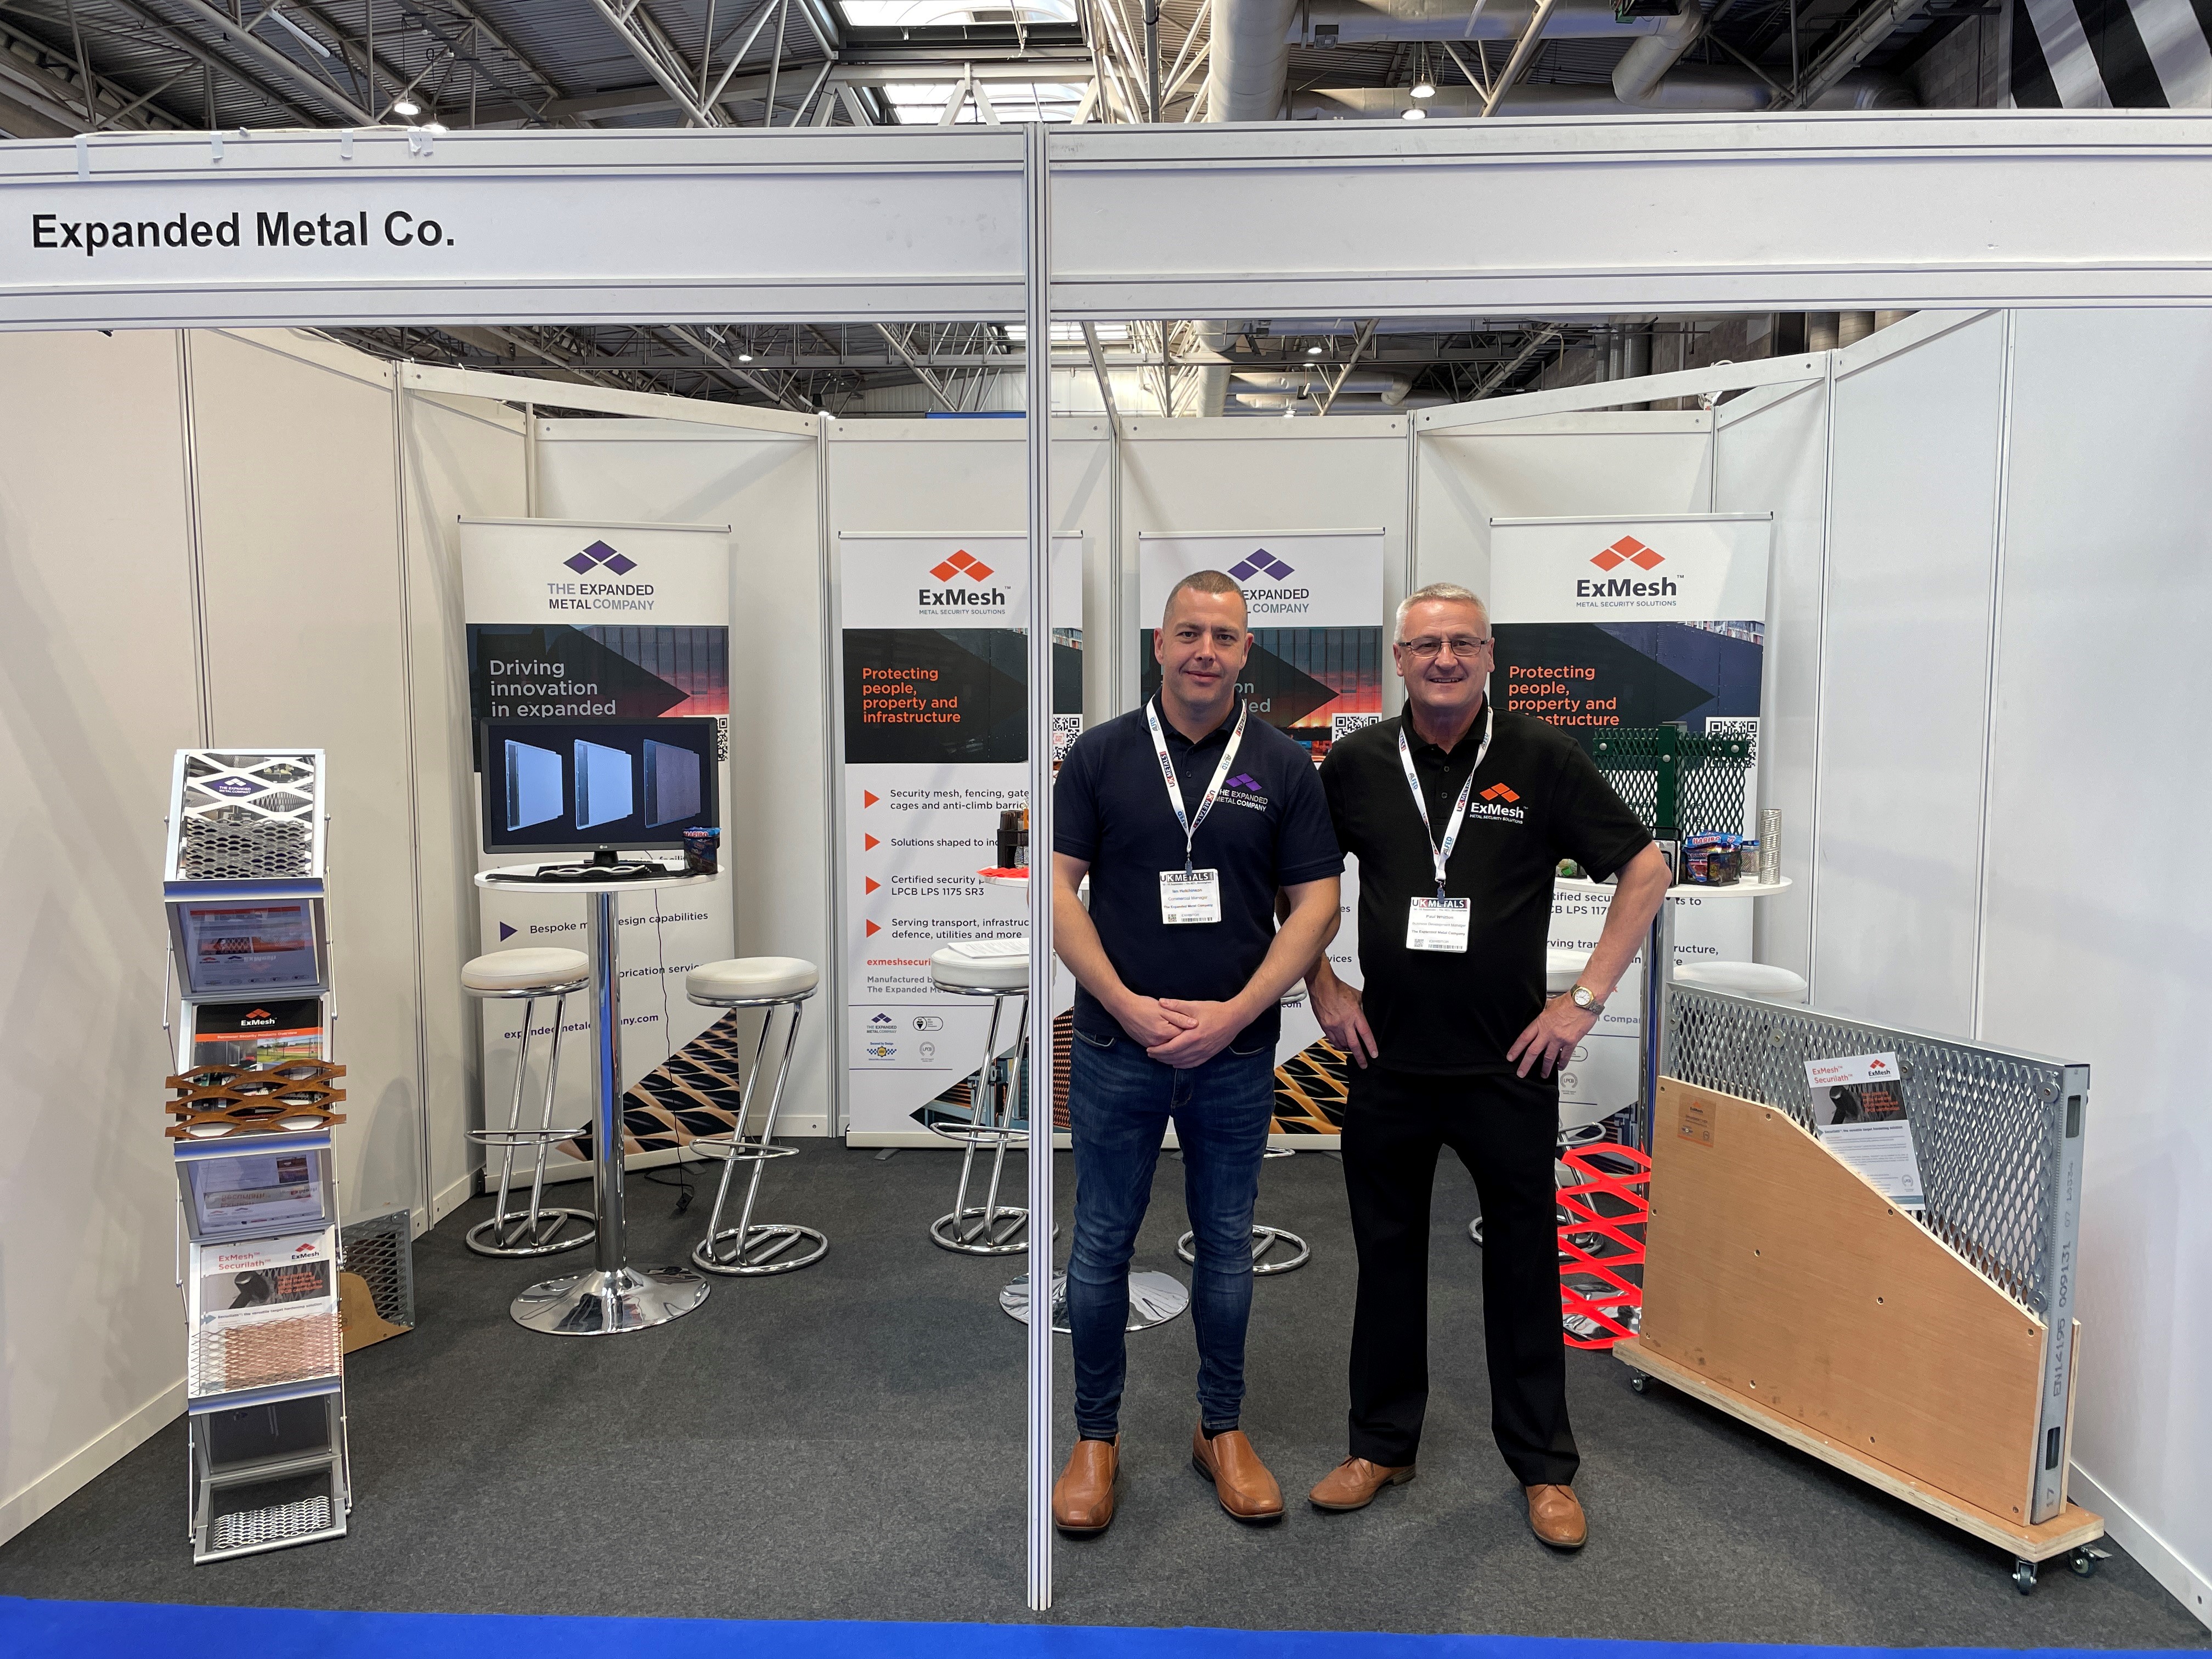 We’re proud to have exhibited at UK Metals Expo 2022 